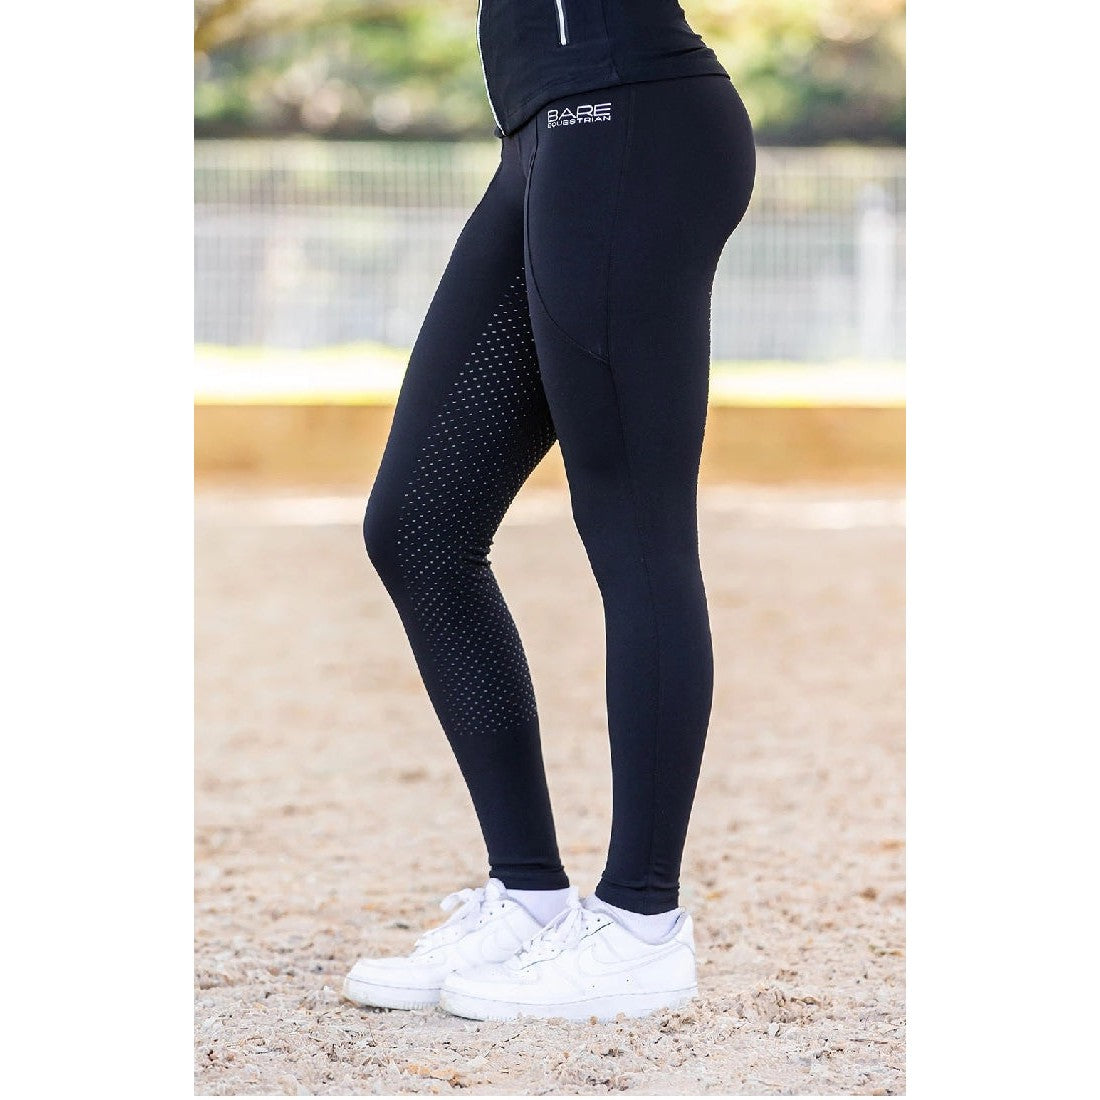 Person in black horse riding tights with dot detailing standing.